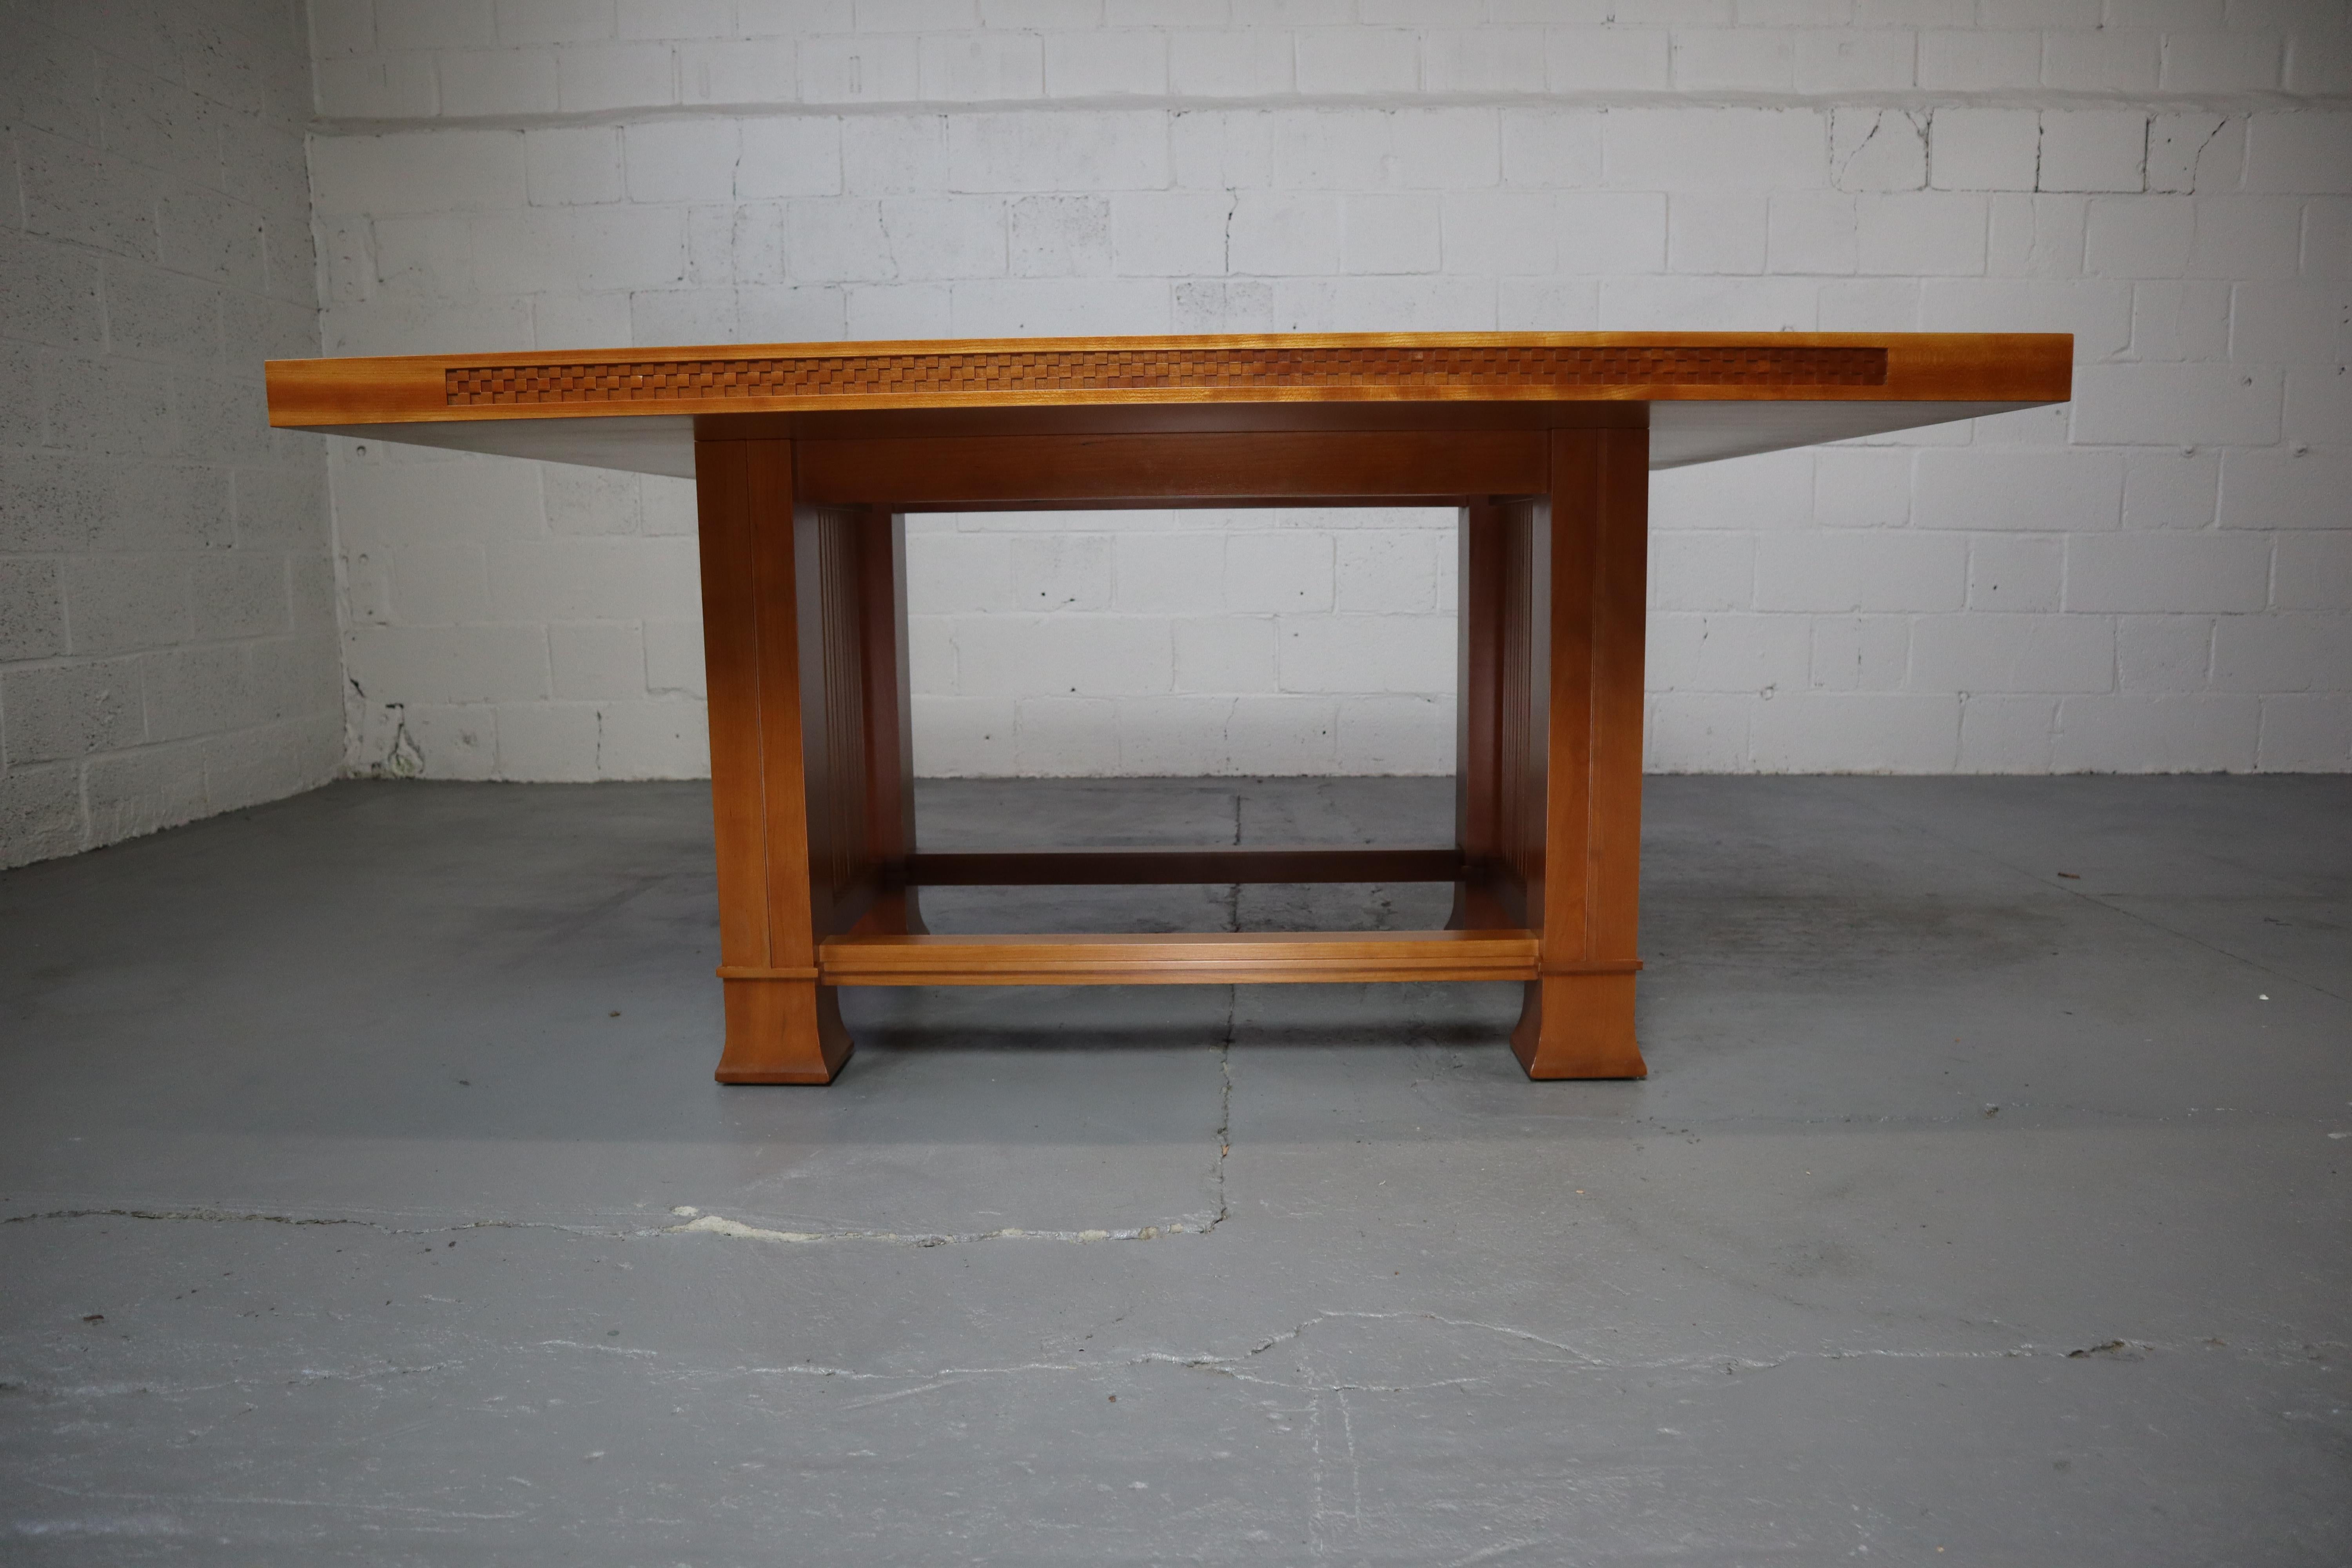 Husser 615 dining table designed by Frank Lloyd Wright in 1899 for the Husser house in Chicago. The Husser house was also designed by Frank Lloyd Wright for Helen and Joseph Husser.
The table was re-edited by Cassina in 1992 and included in the